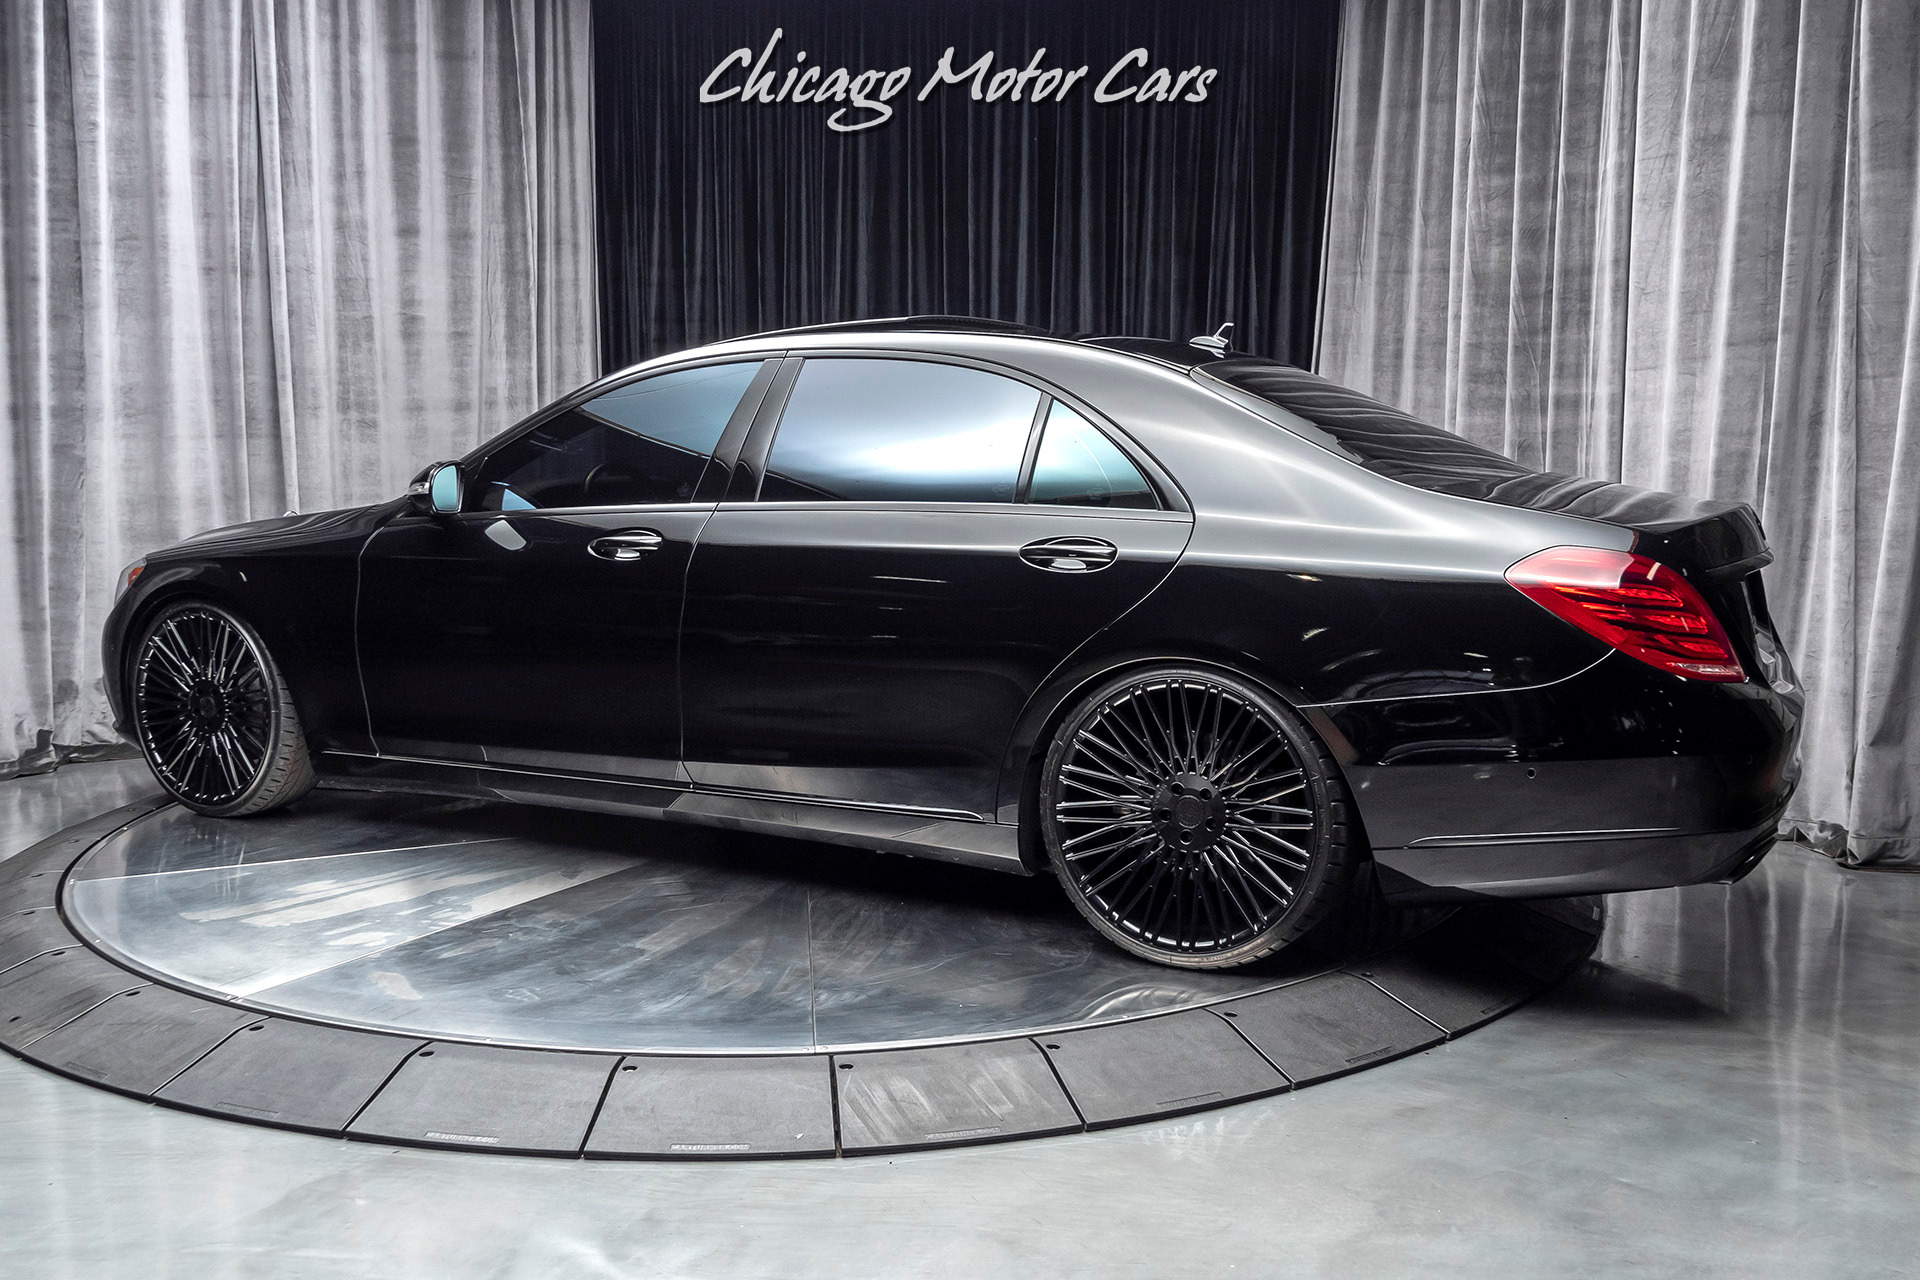 Used-2015-Mercedes-Benz-S-Class-S-550-103kMSRP-22-Black-Forgiato-Wheels